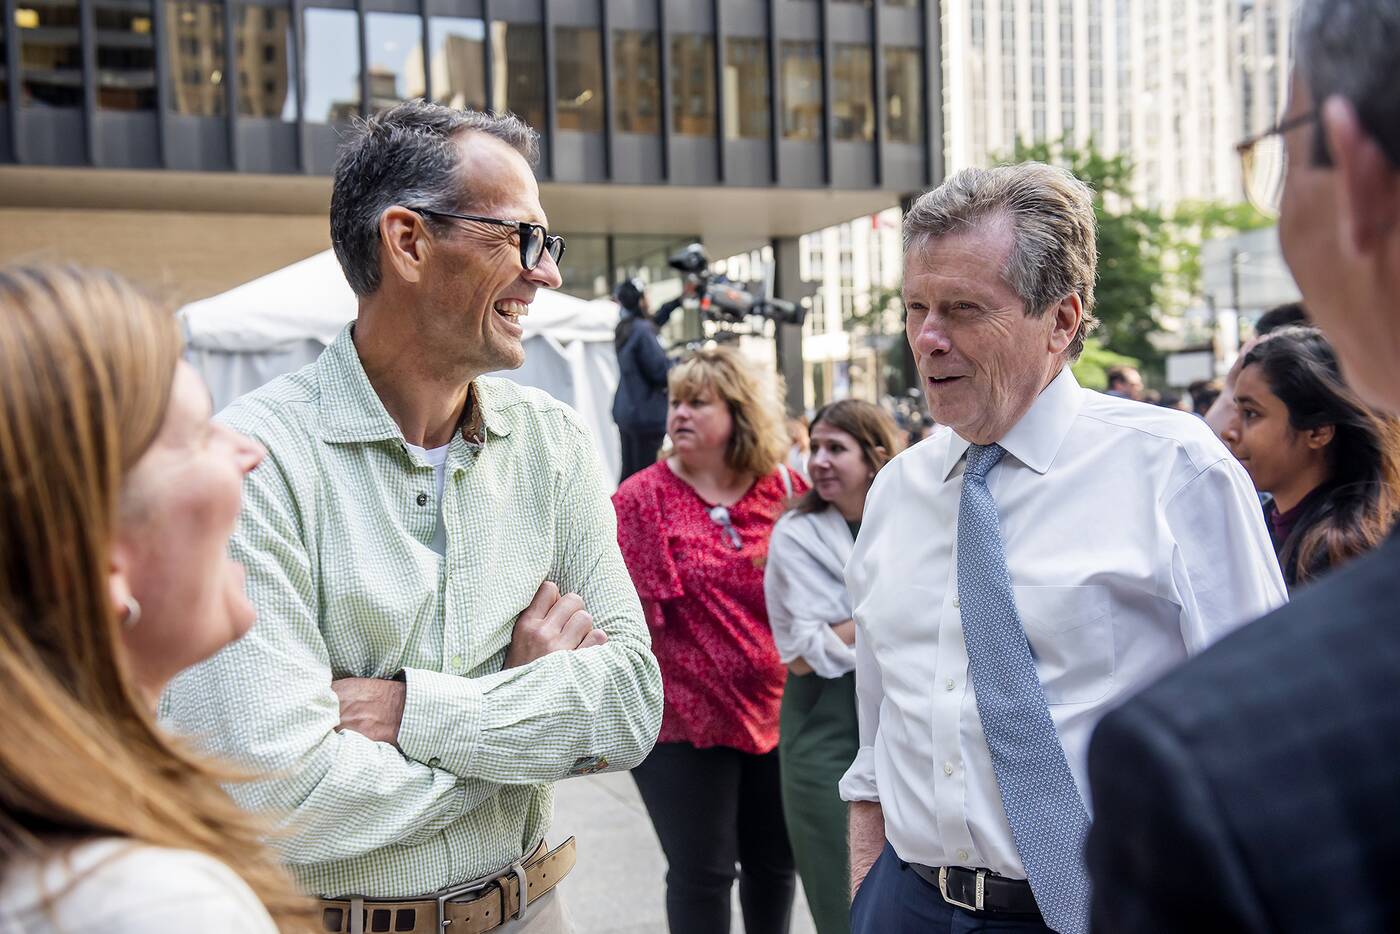 John Tory did a walk-around and interacted with TD employees at the event.